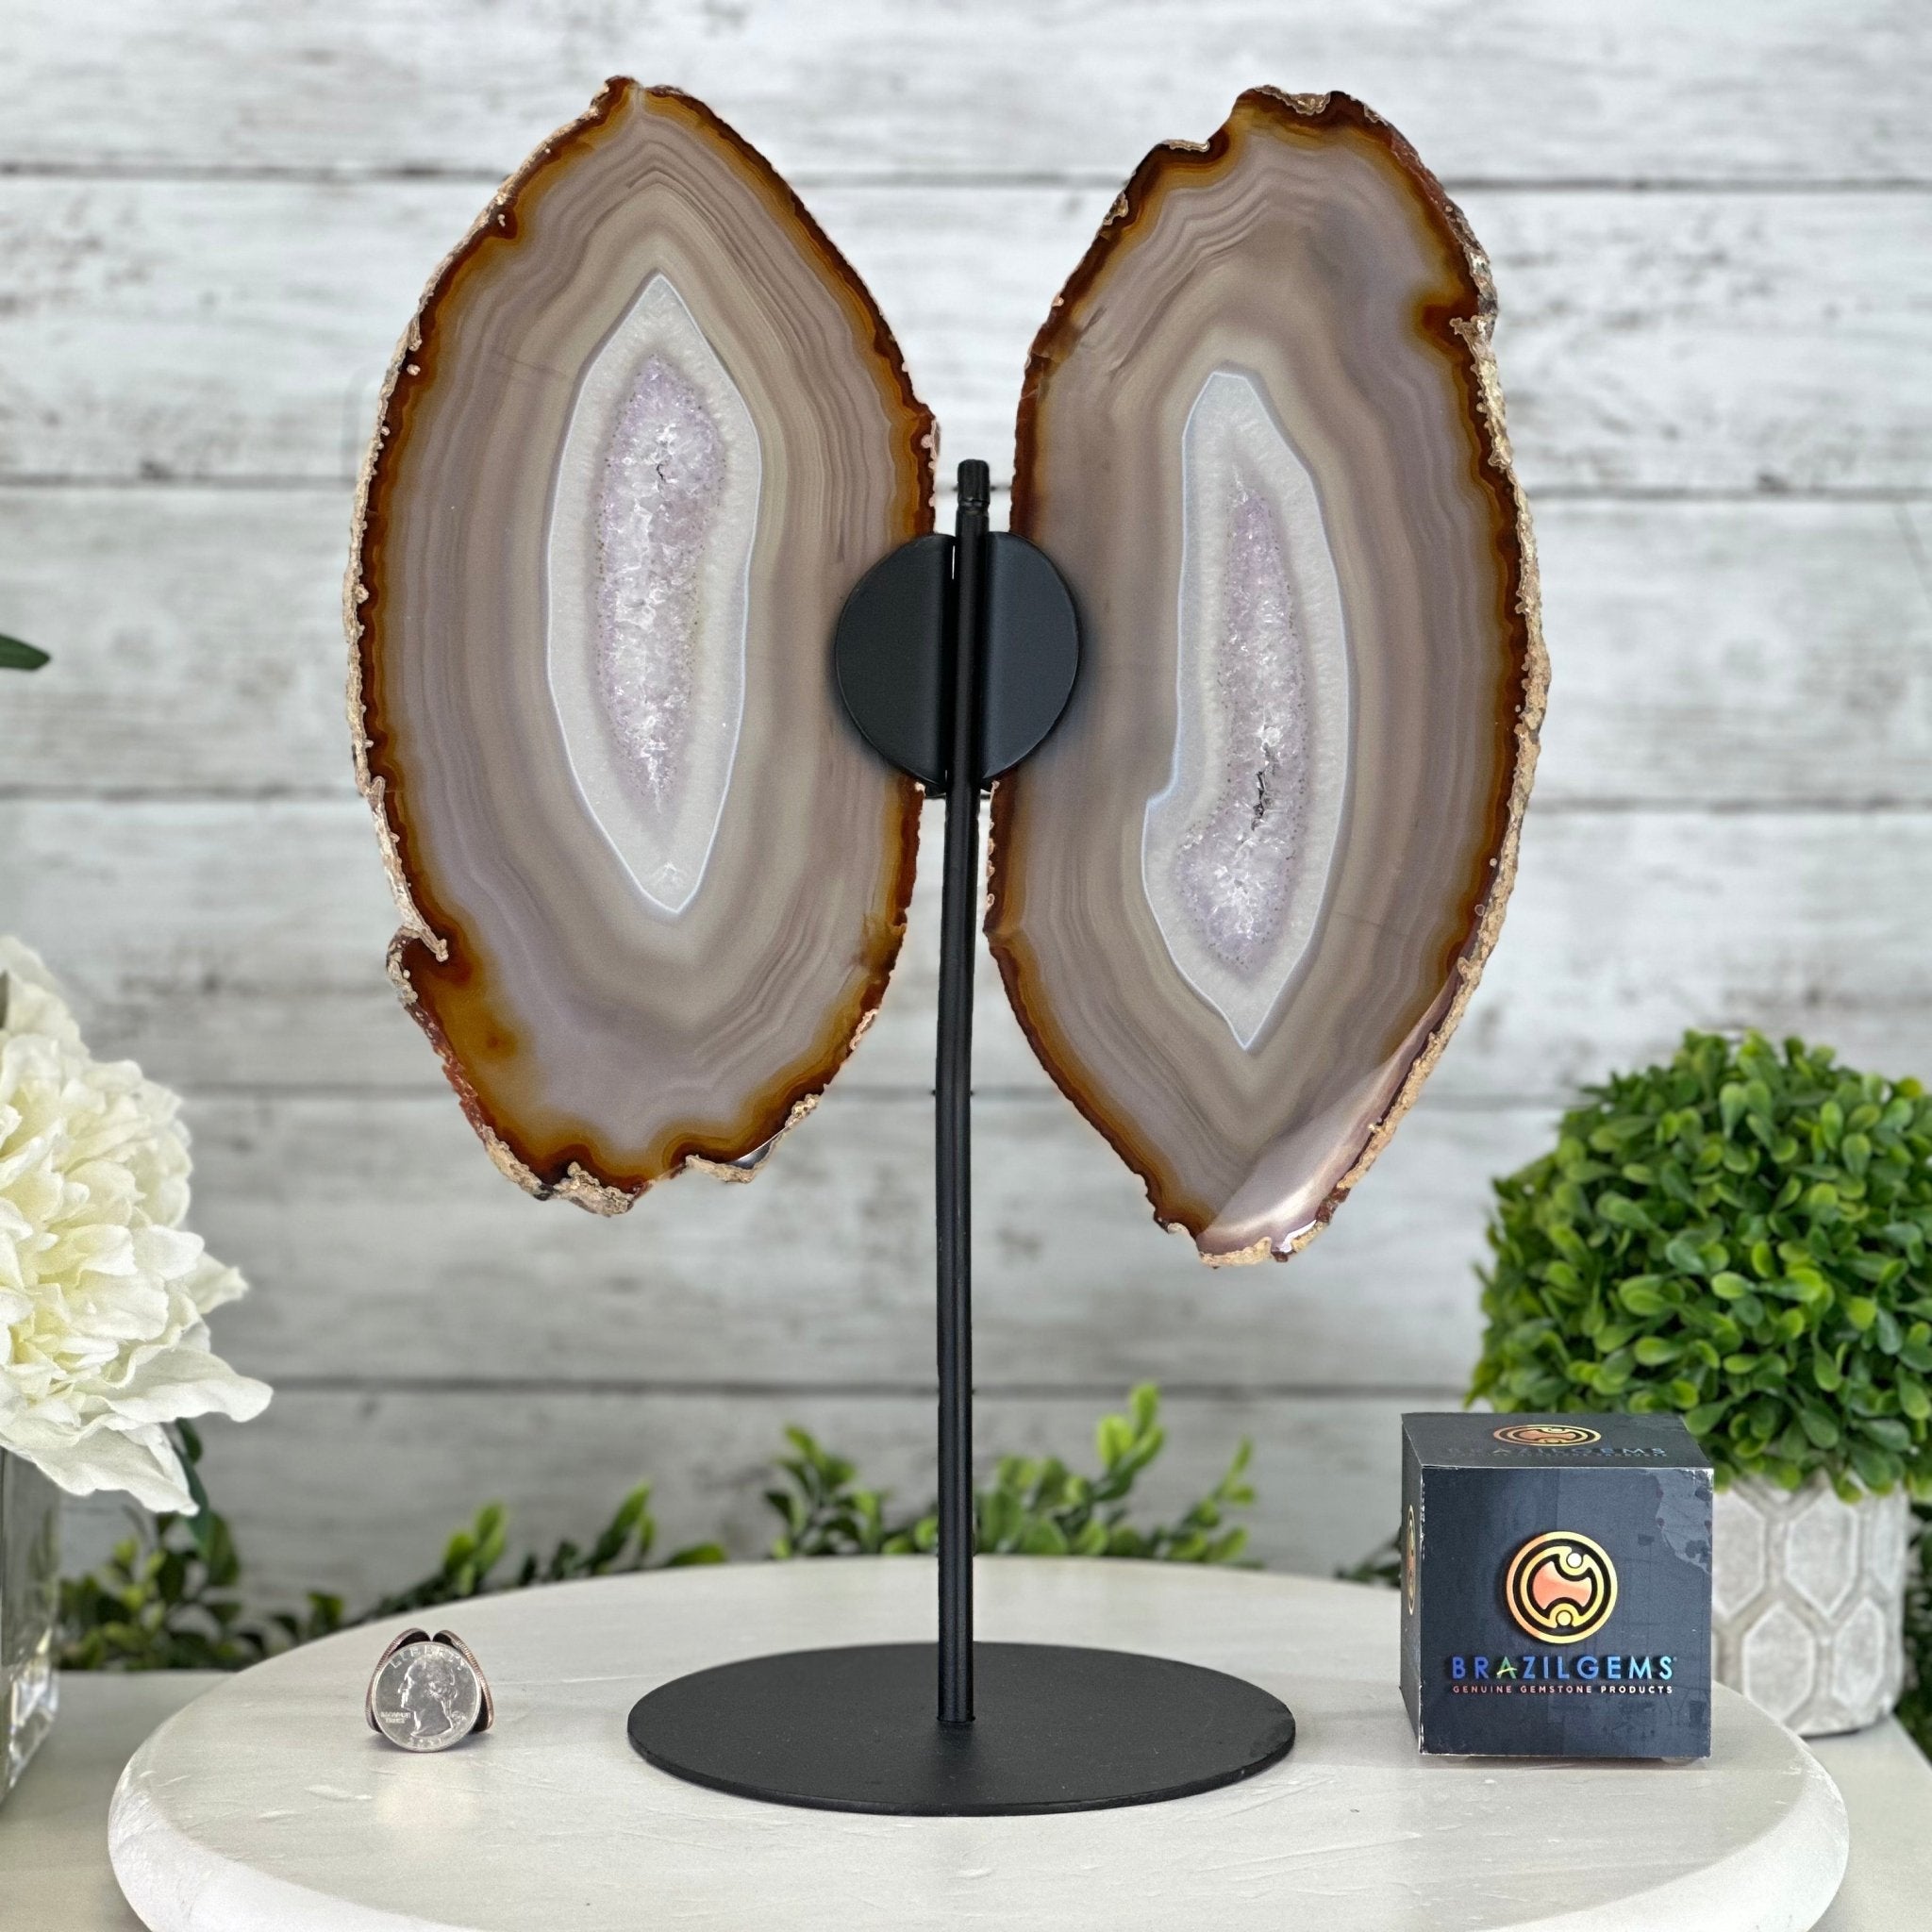 Natural Brazilian Agate "Butterfly Wings", 15" Tall #5050NA-085 - Brazil GemsBrazil GemsNatural Brazilian Agate "Butterfly Wings", 15" Tall #5050NA-085Agate Butterfly Wings5050NA-085